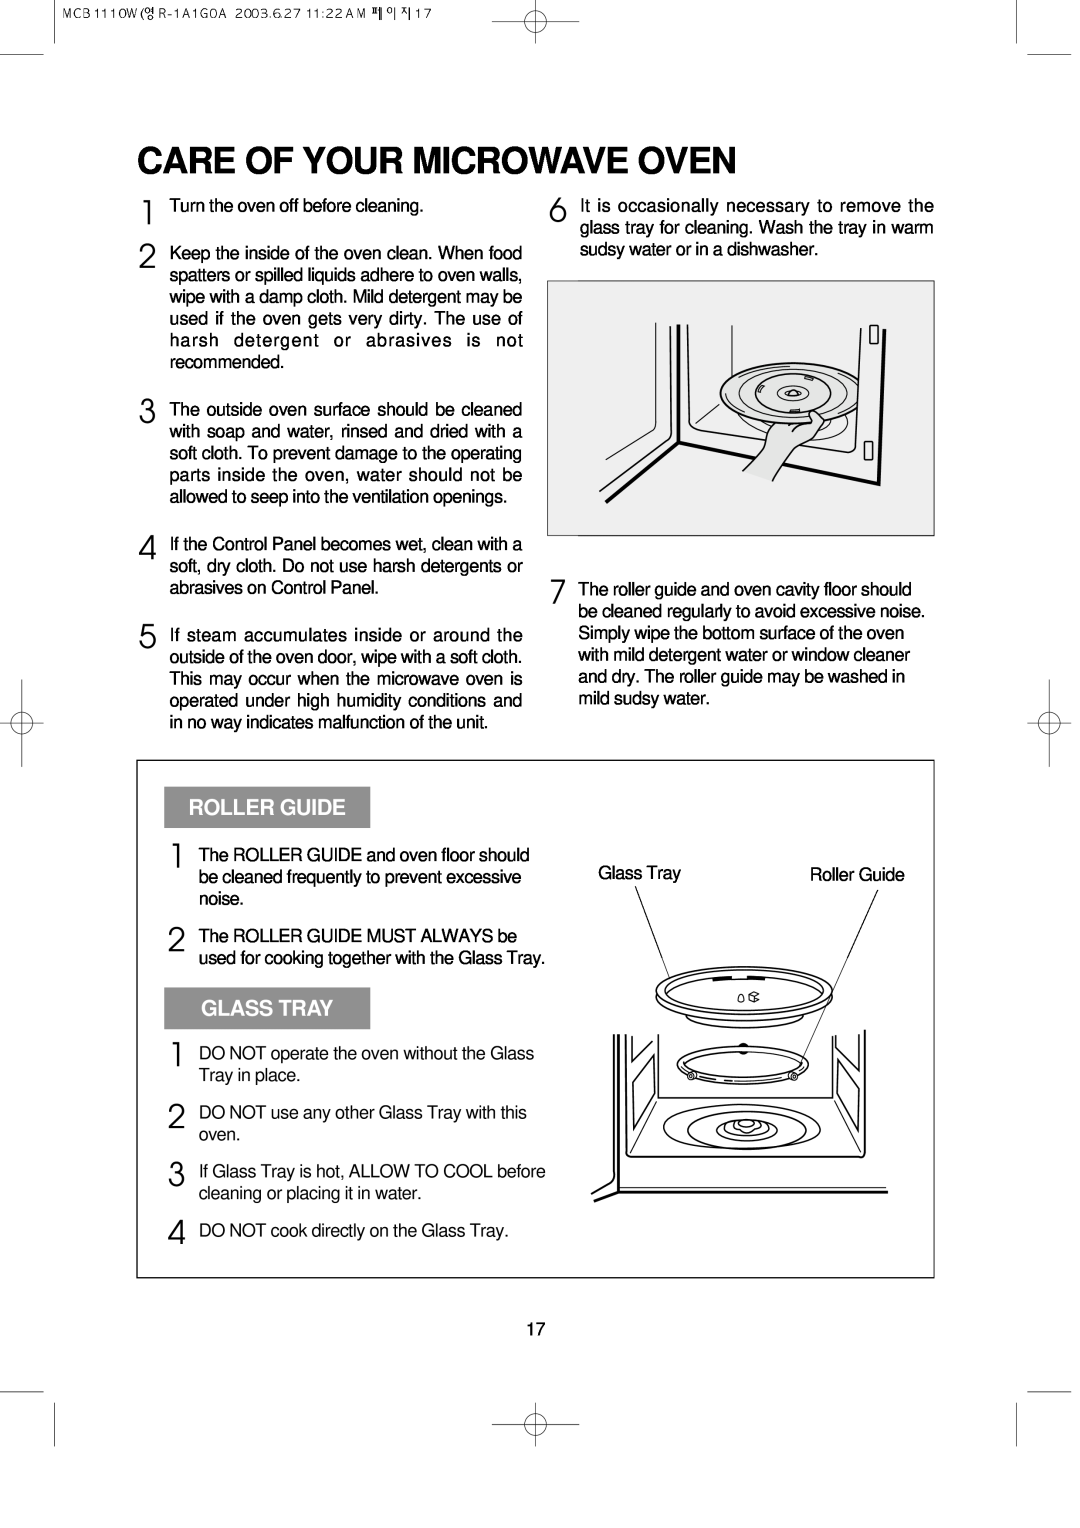 Magic Chef MCB1110W instruction manual Care Of Your Microwave Oven, Roller Guide, Glass Tray 